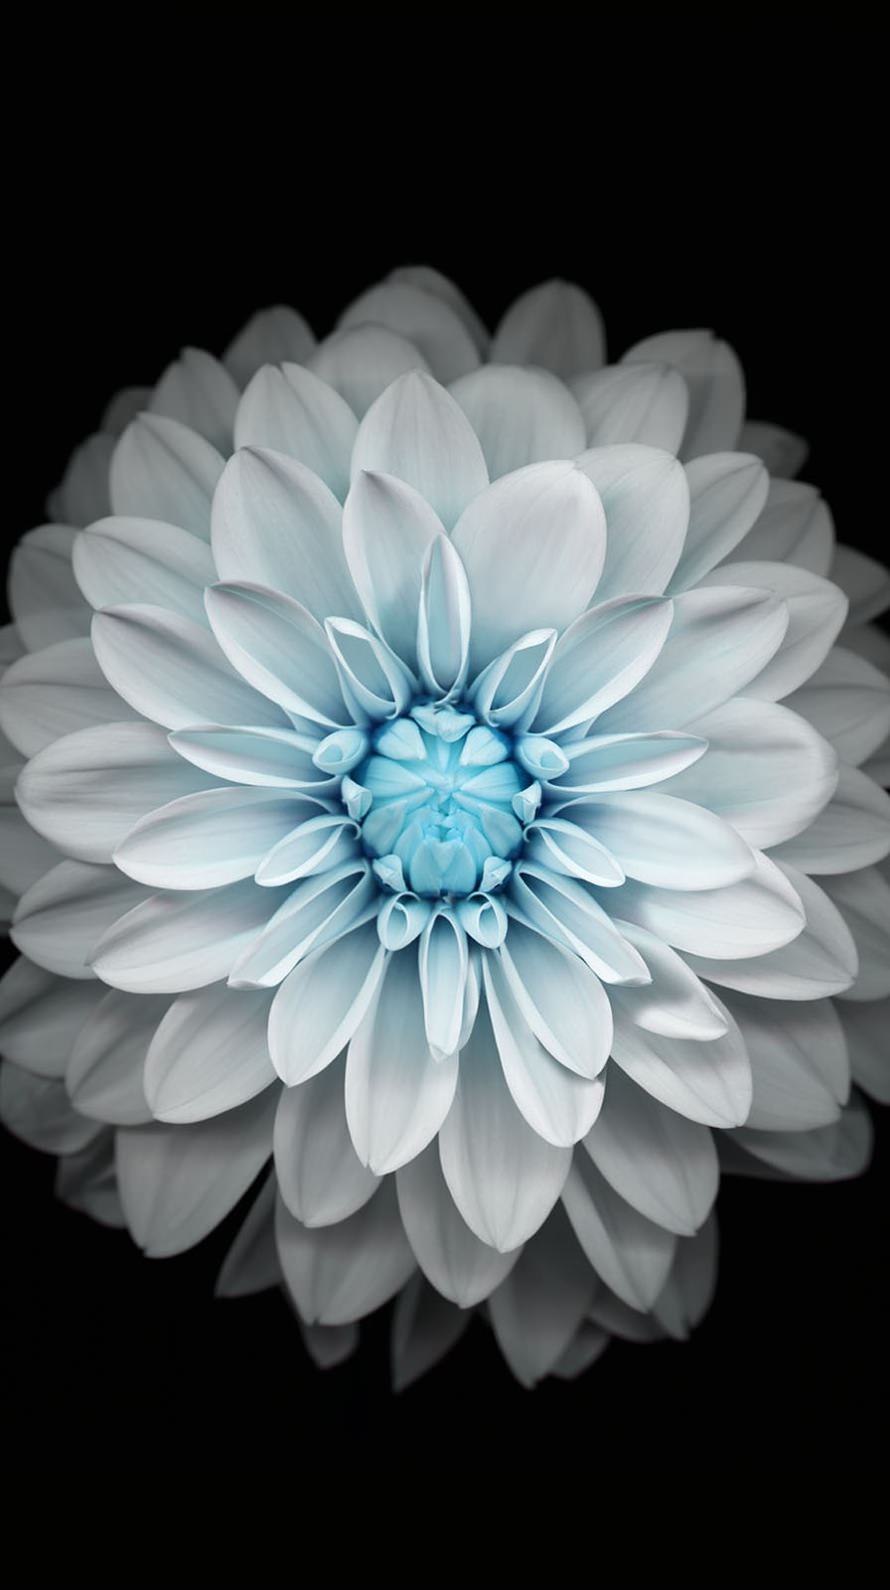 Flower Black And White Wallpaper Sc iPhone6